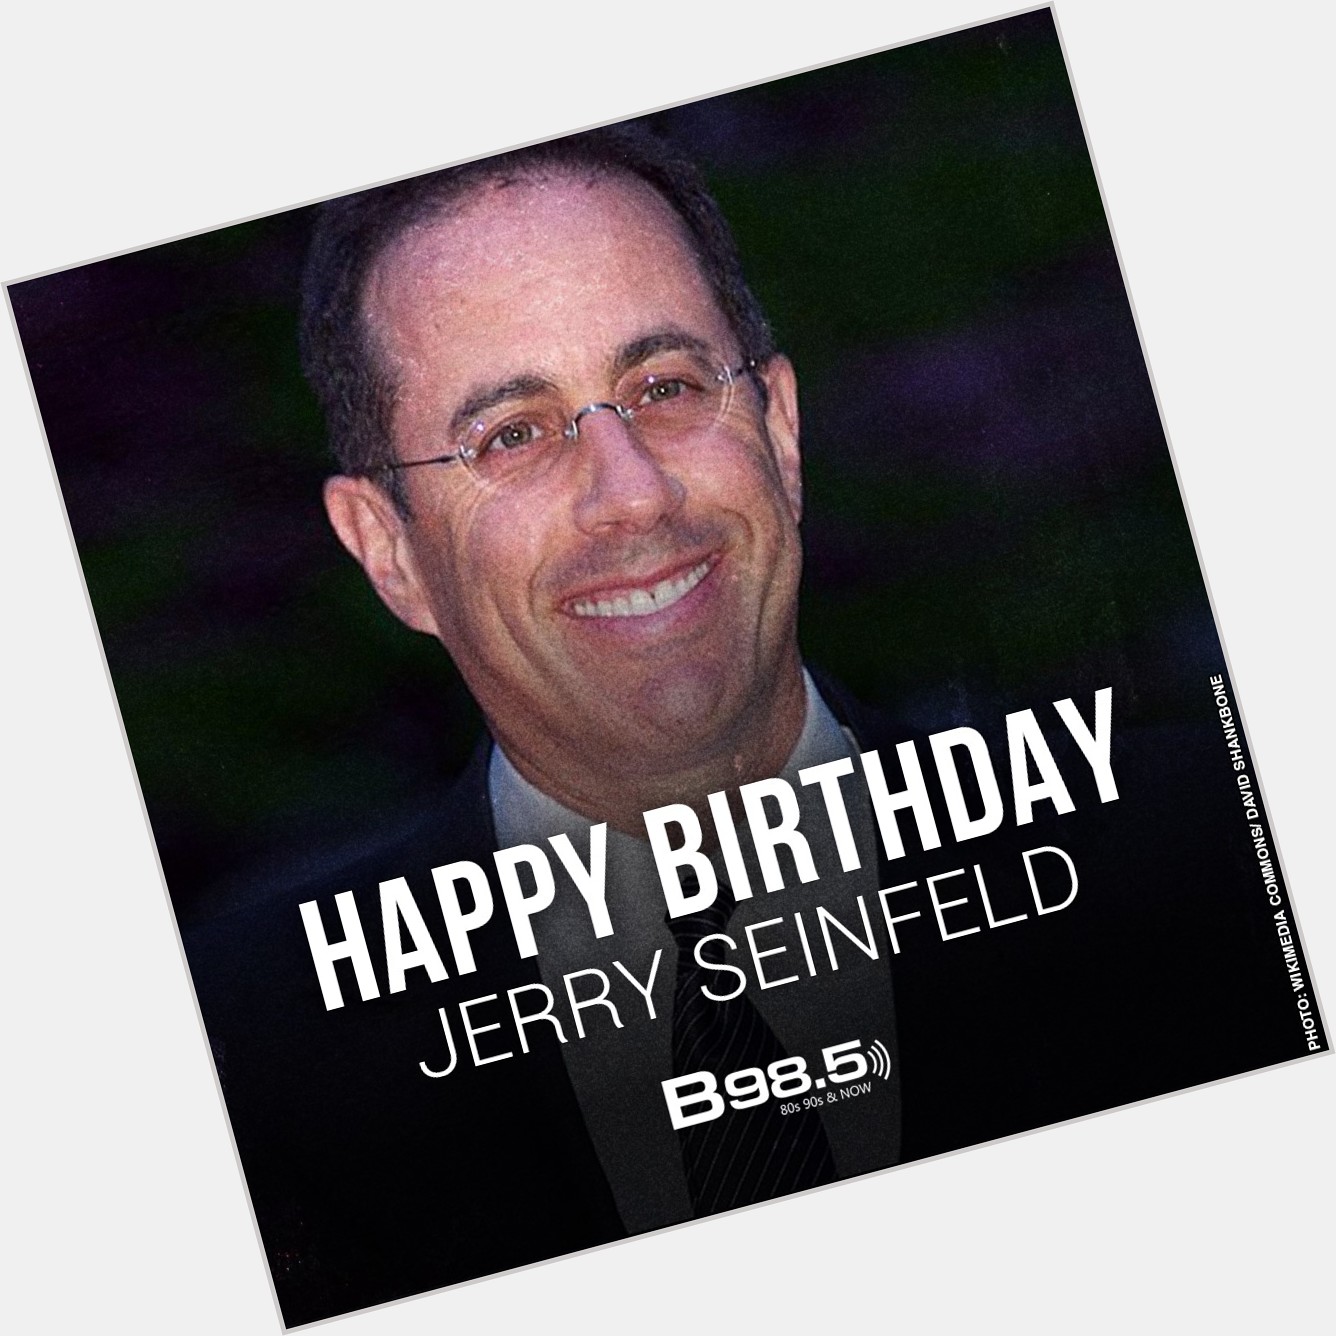 Love me some him!! Wishing a big happy birthday to Jerry Seinfeld!!! - Toni Moore 